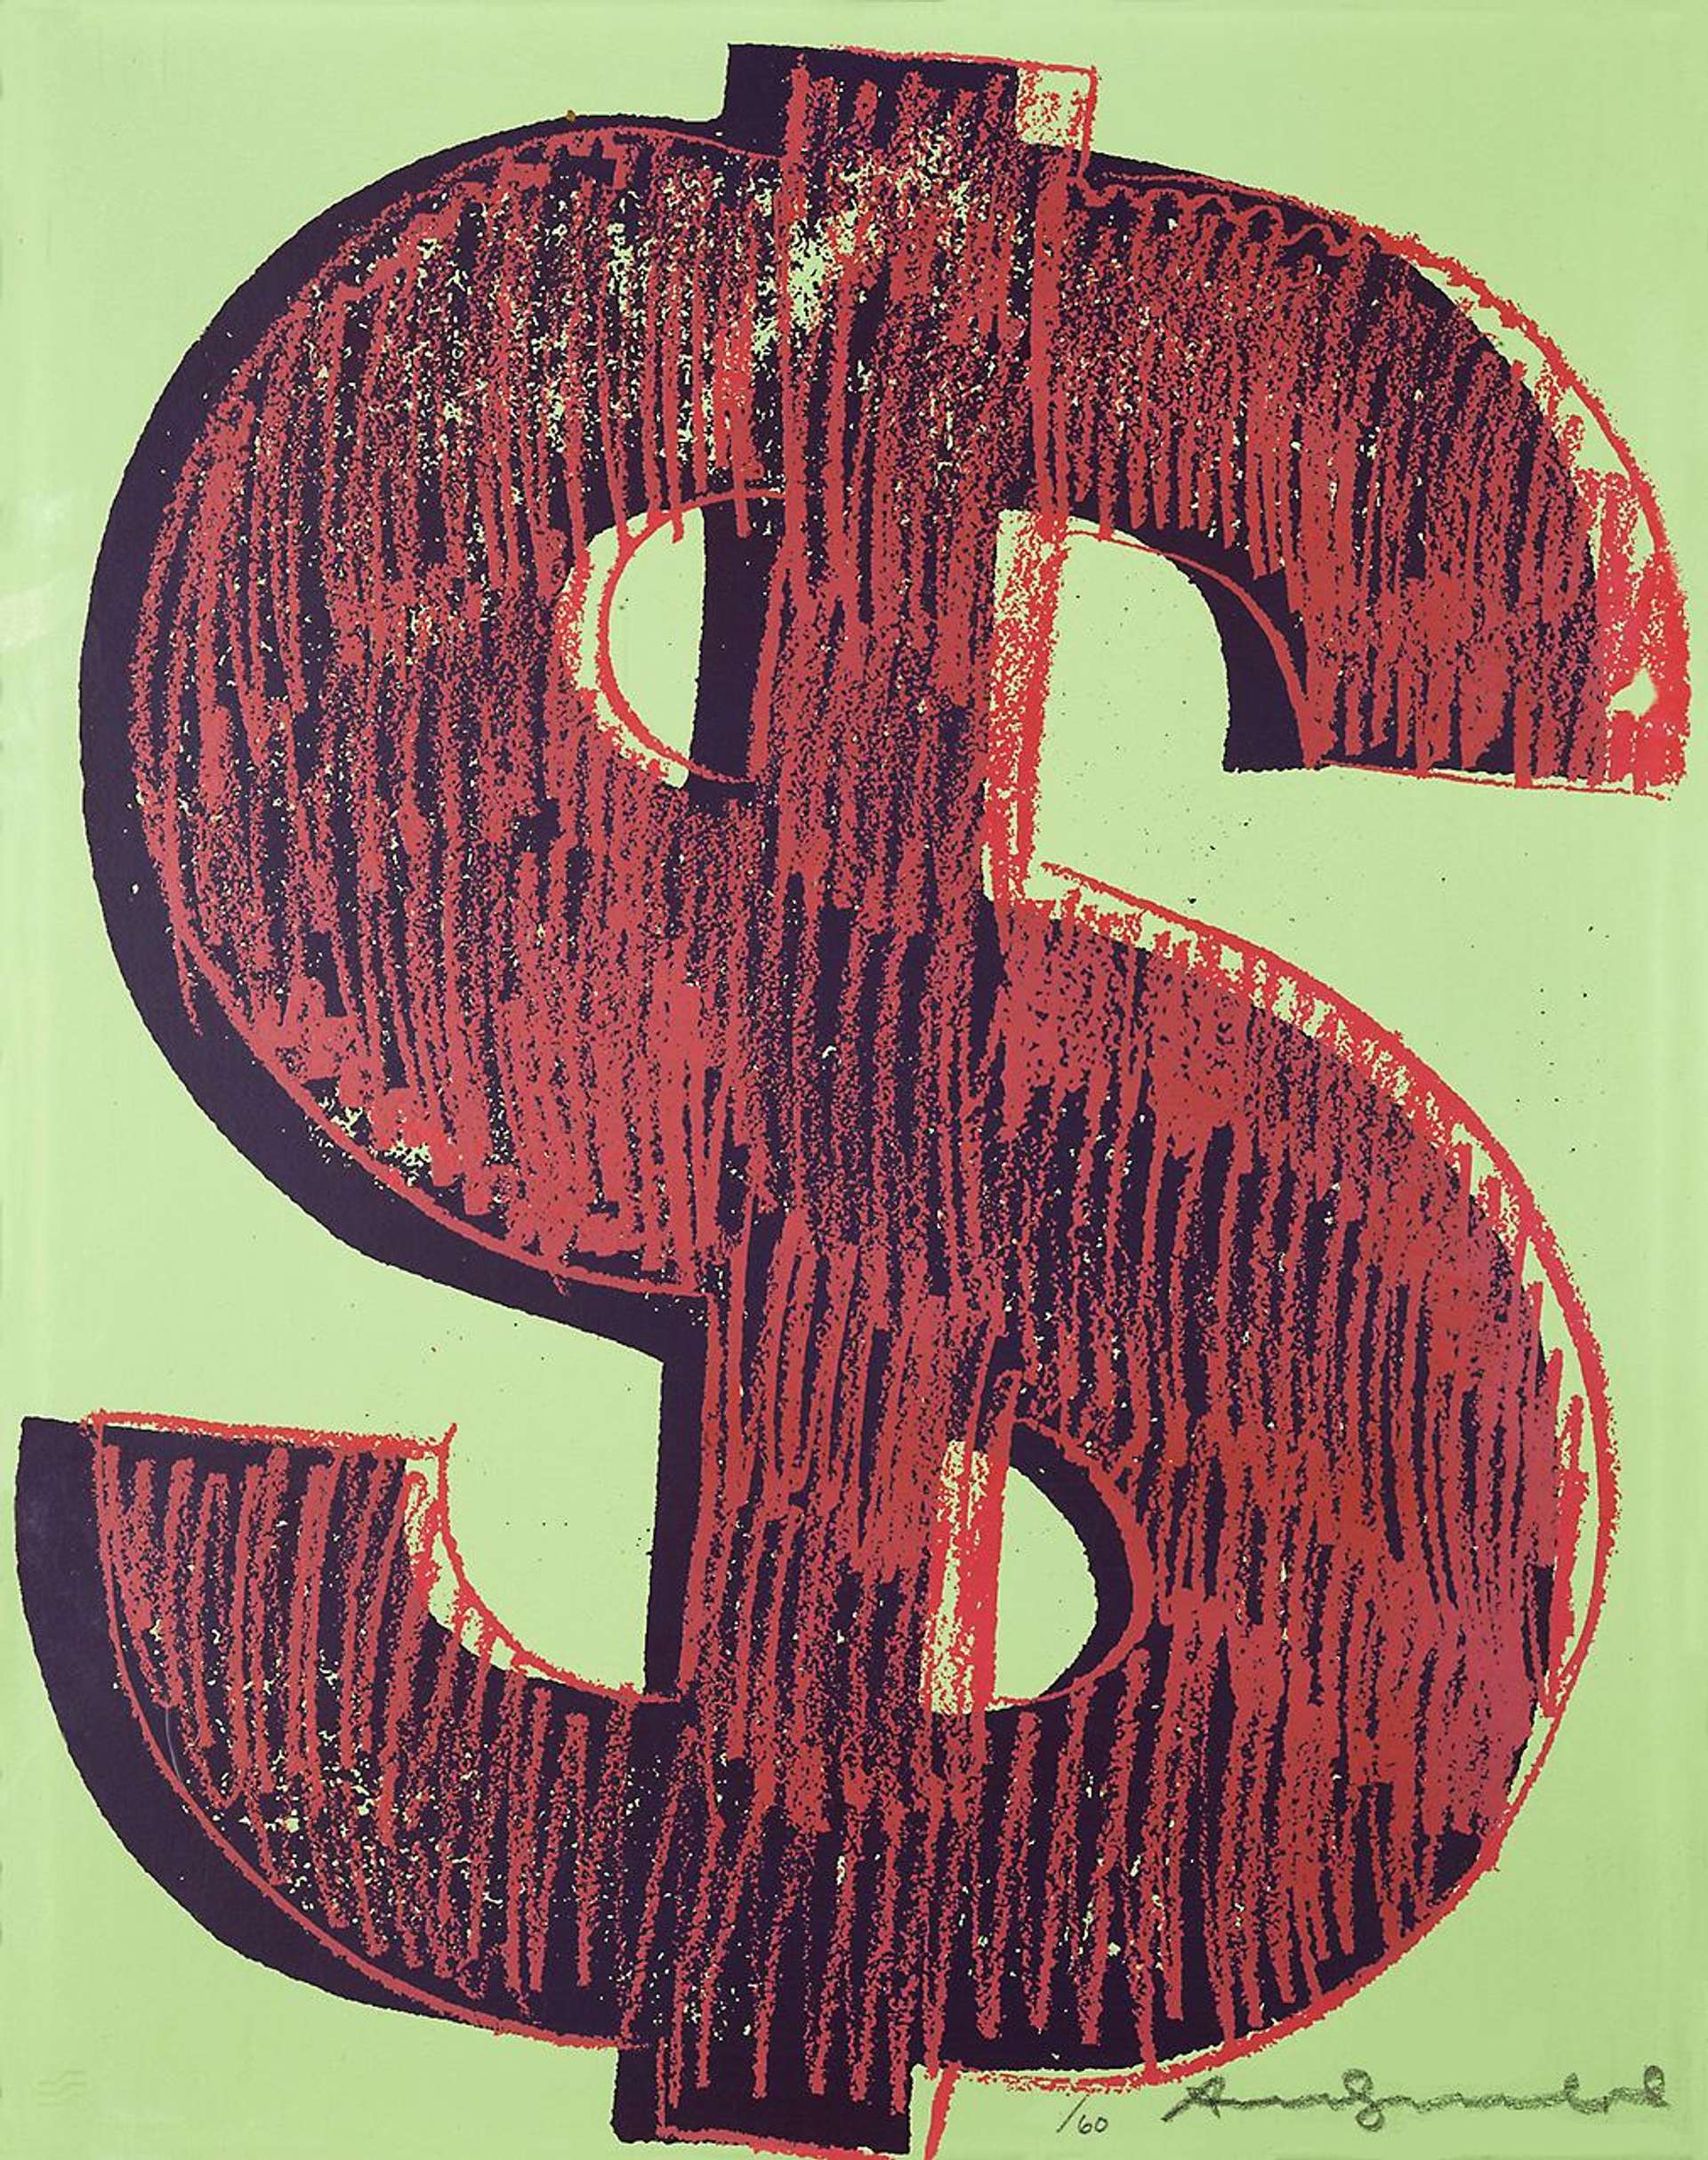 A dollar sign fills the composition against a light green background. The dollar sign is printed in two layers: the bottom is a graphic black, and the top layer is rendered in painterly striations. The artist's signature appears in the bottom right corner of the screen print.